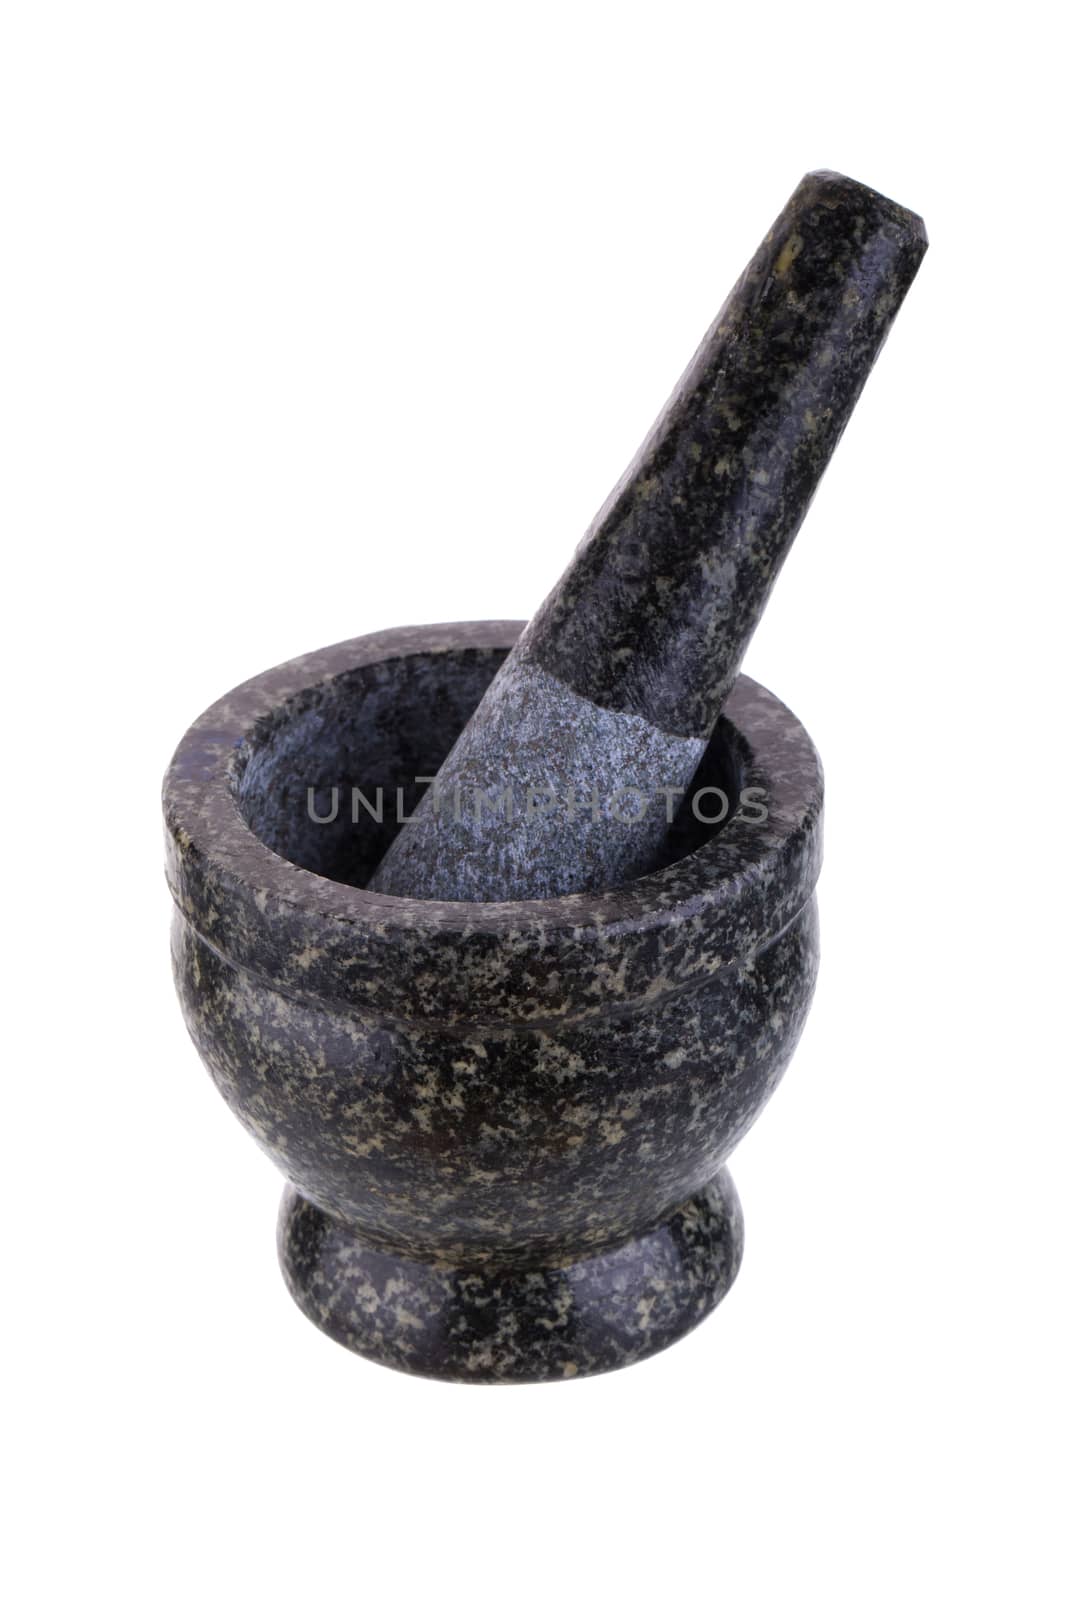 Stone Mortar and Pestle isolated on white background.